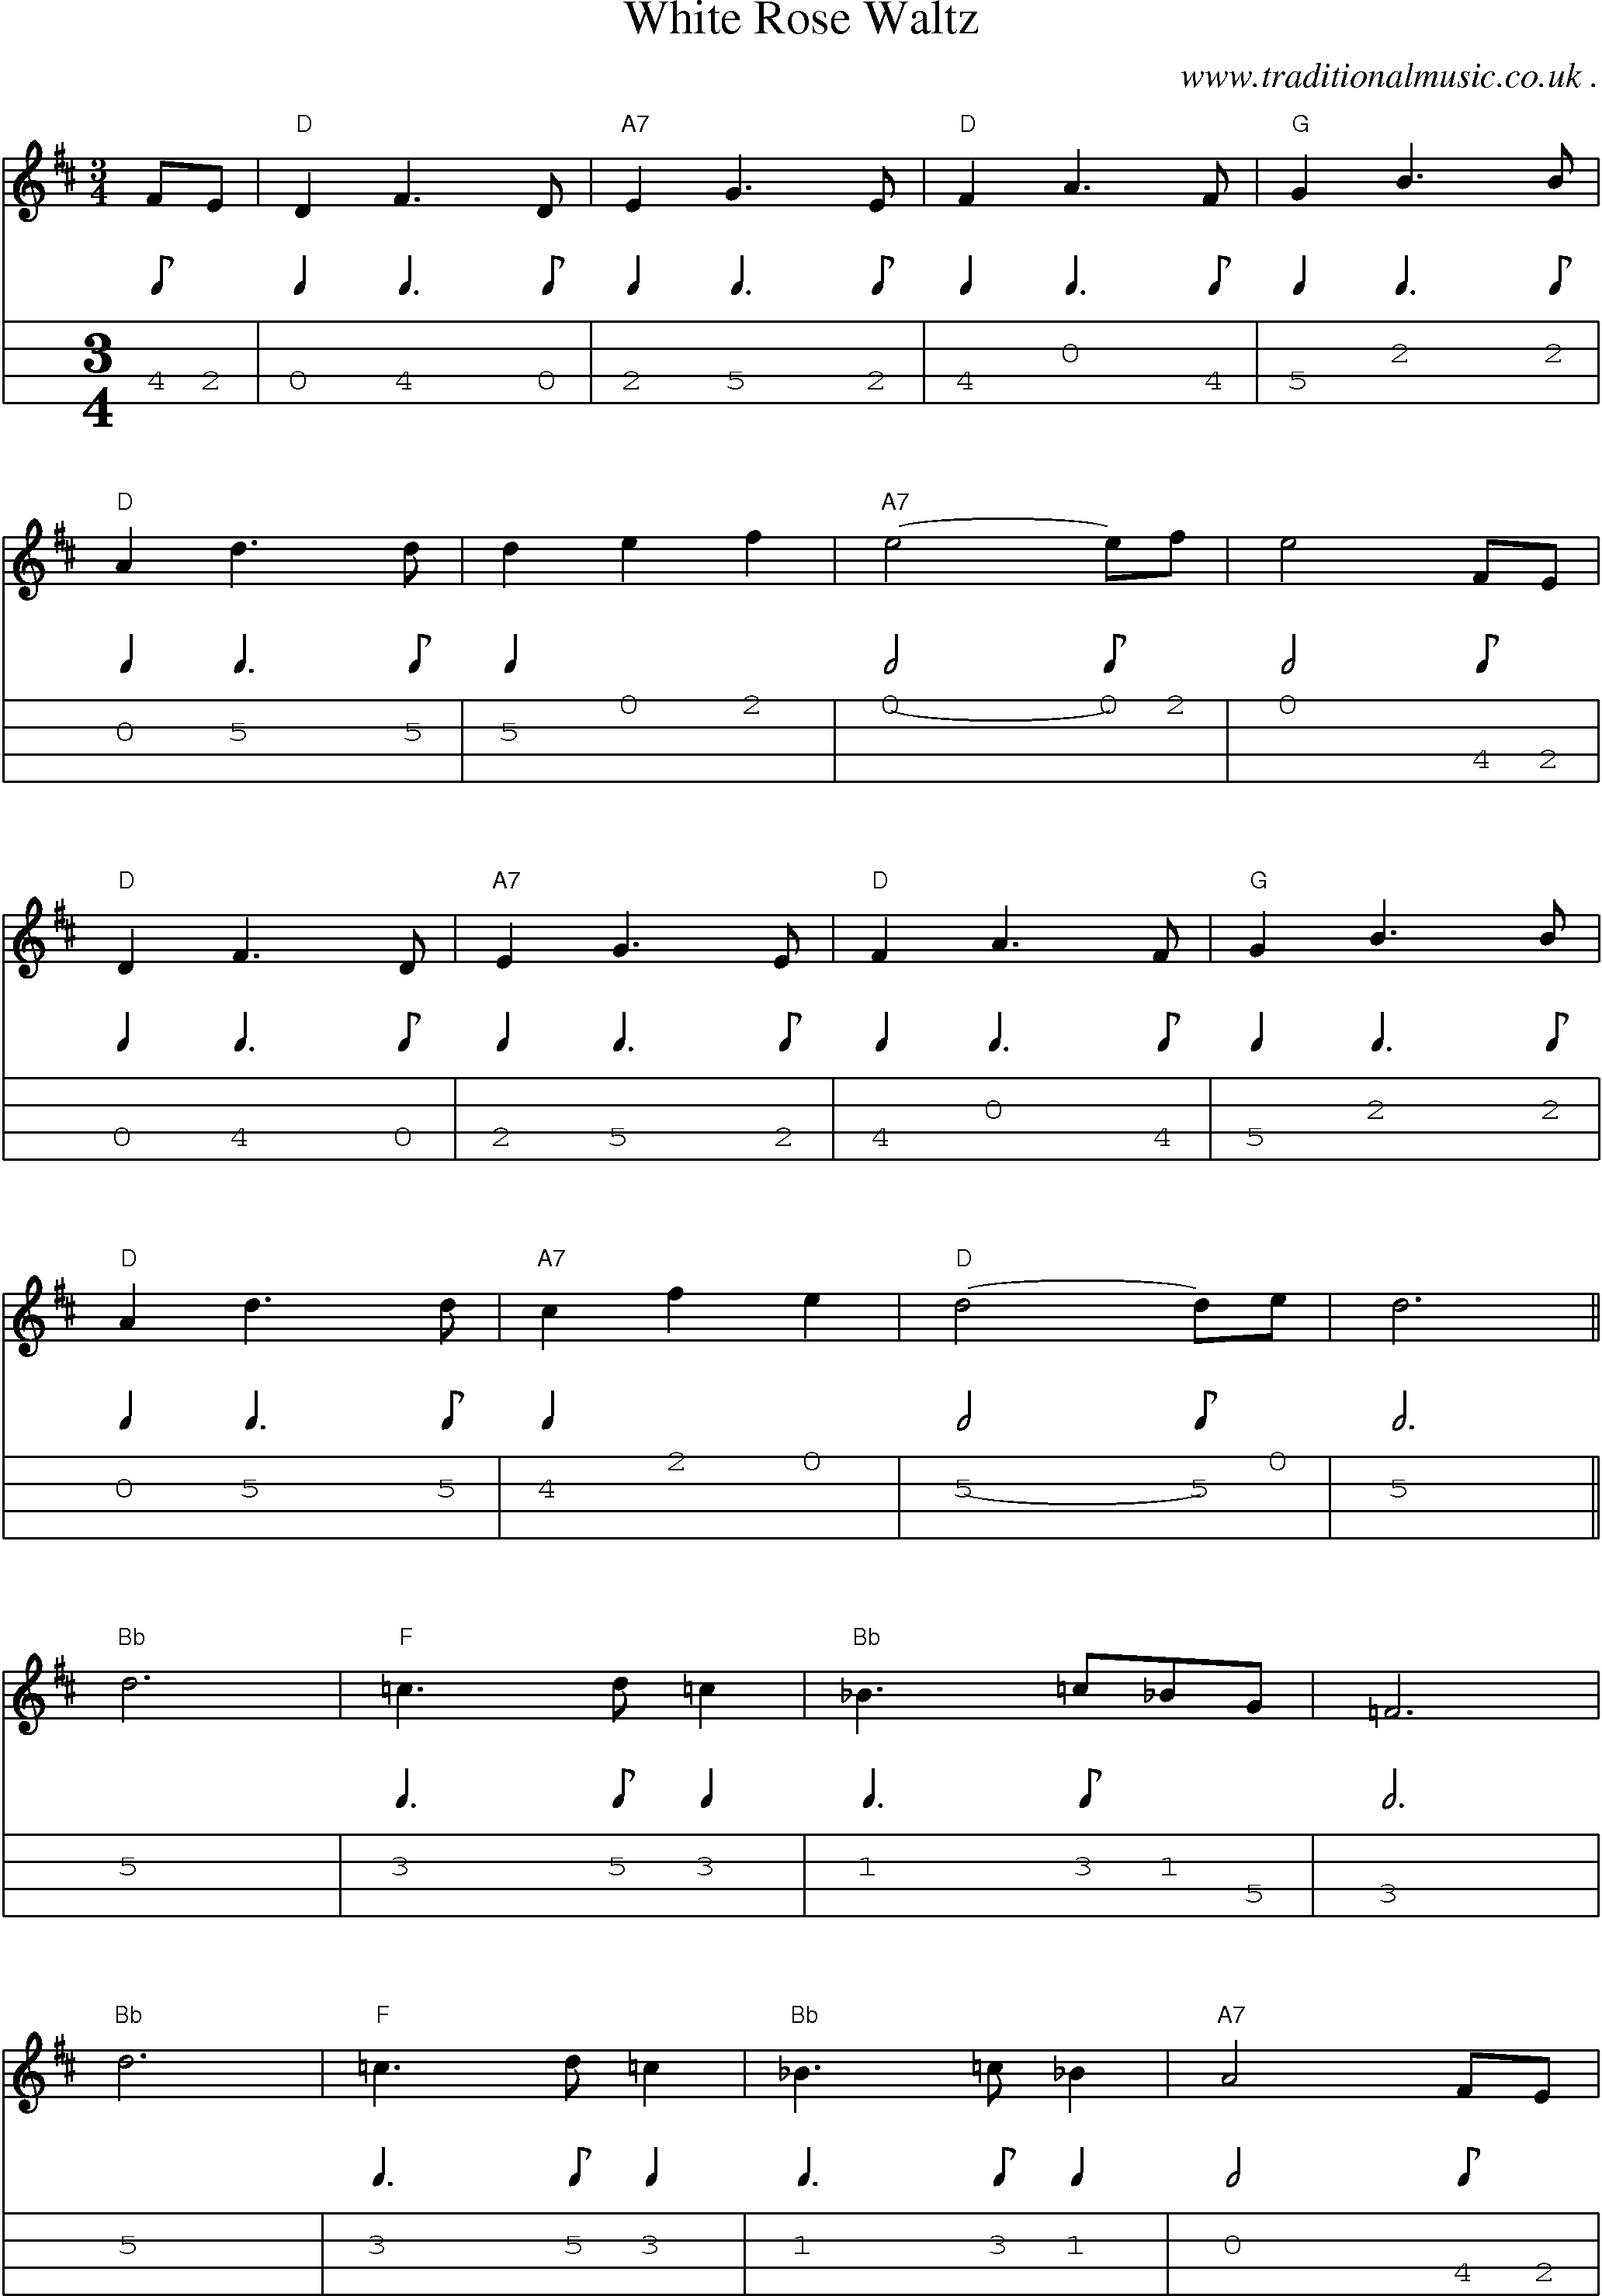 Sheet-Music and Mandolin Tabs for White Rose Waltz